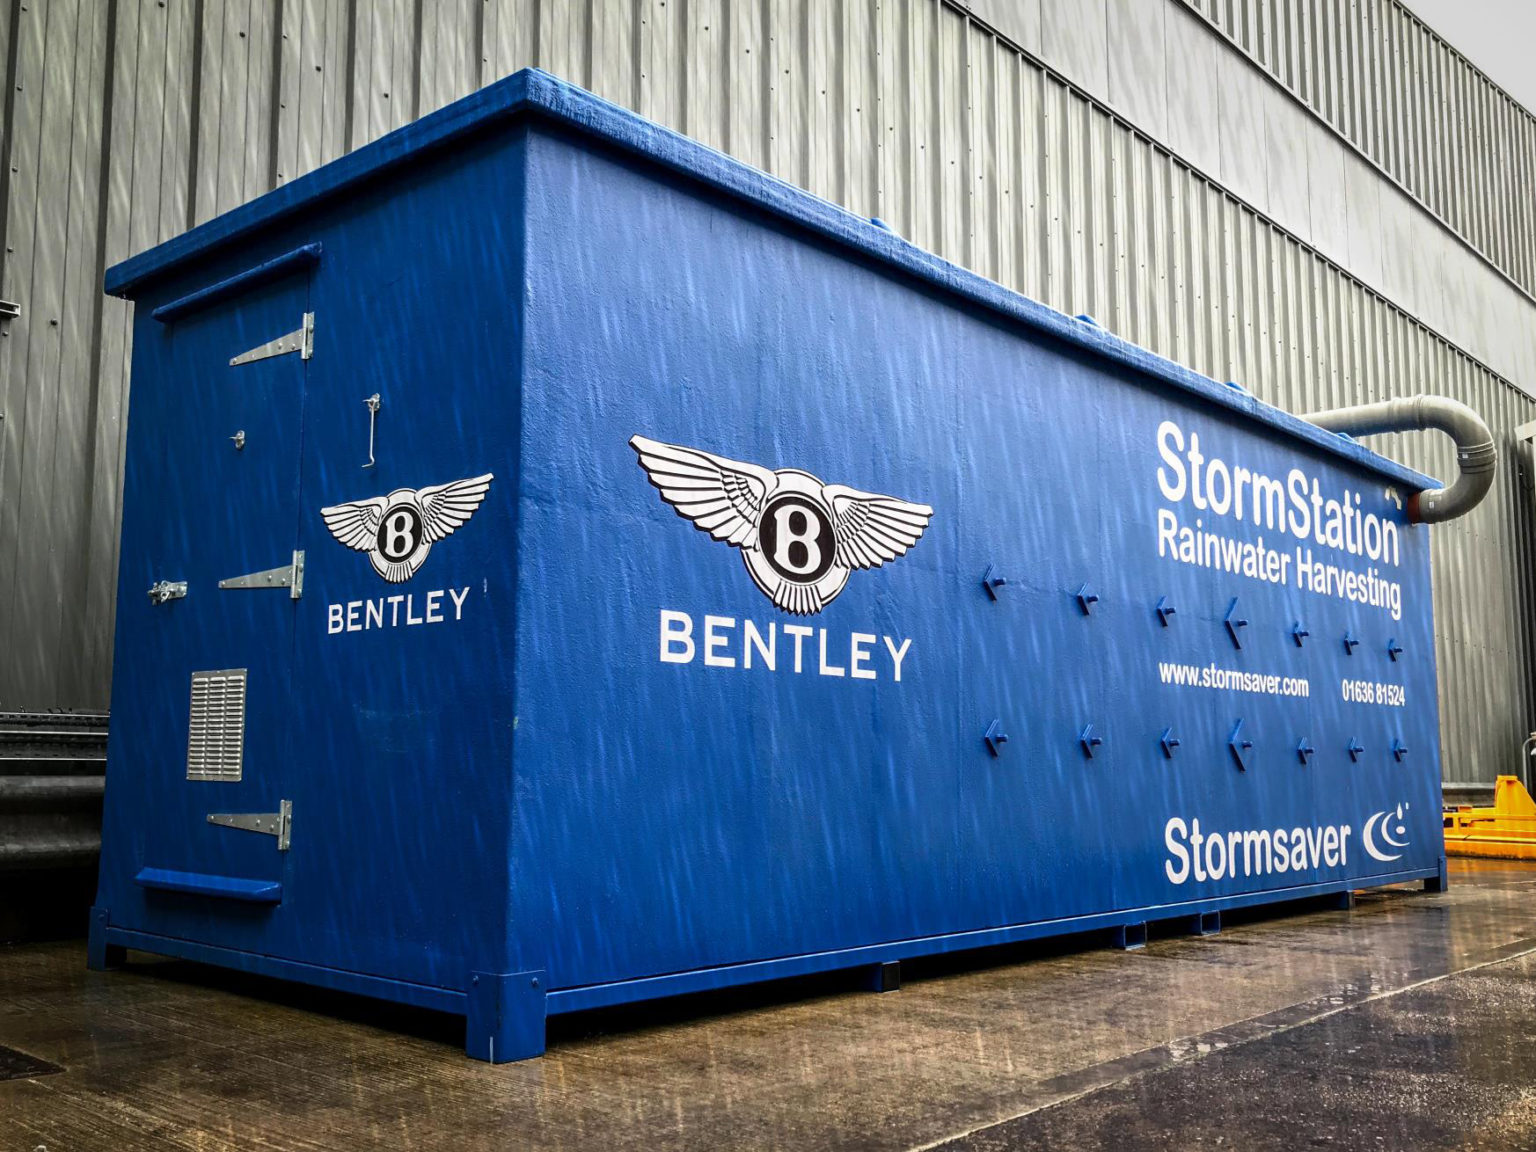 A new rainwater harvesting station was installed at Bentley's headquarters recently.